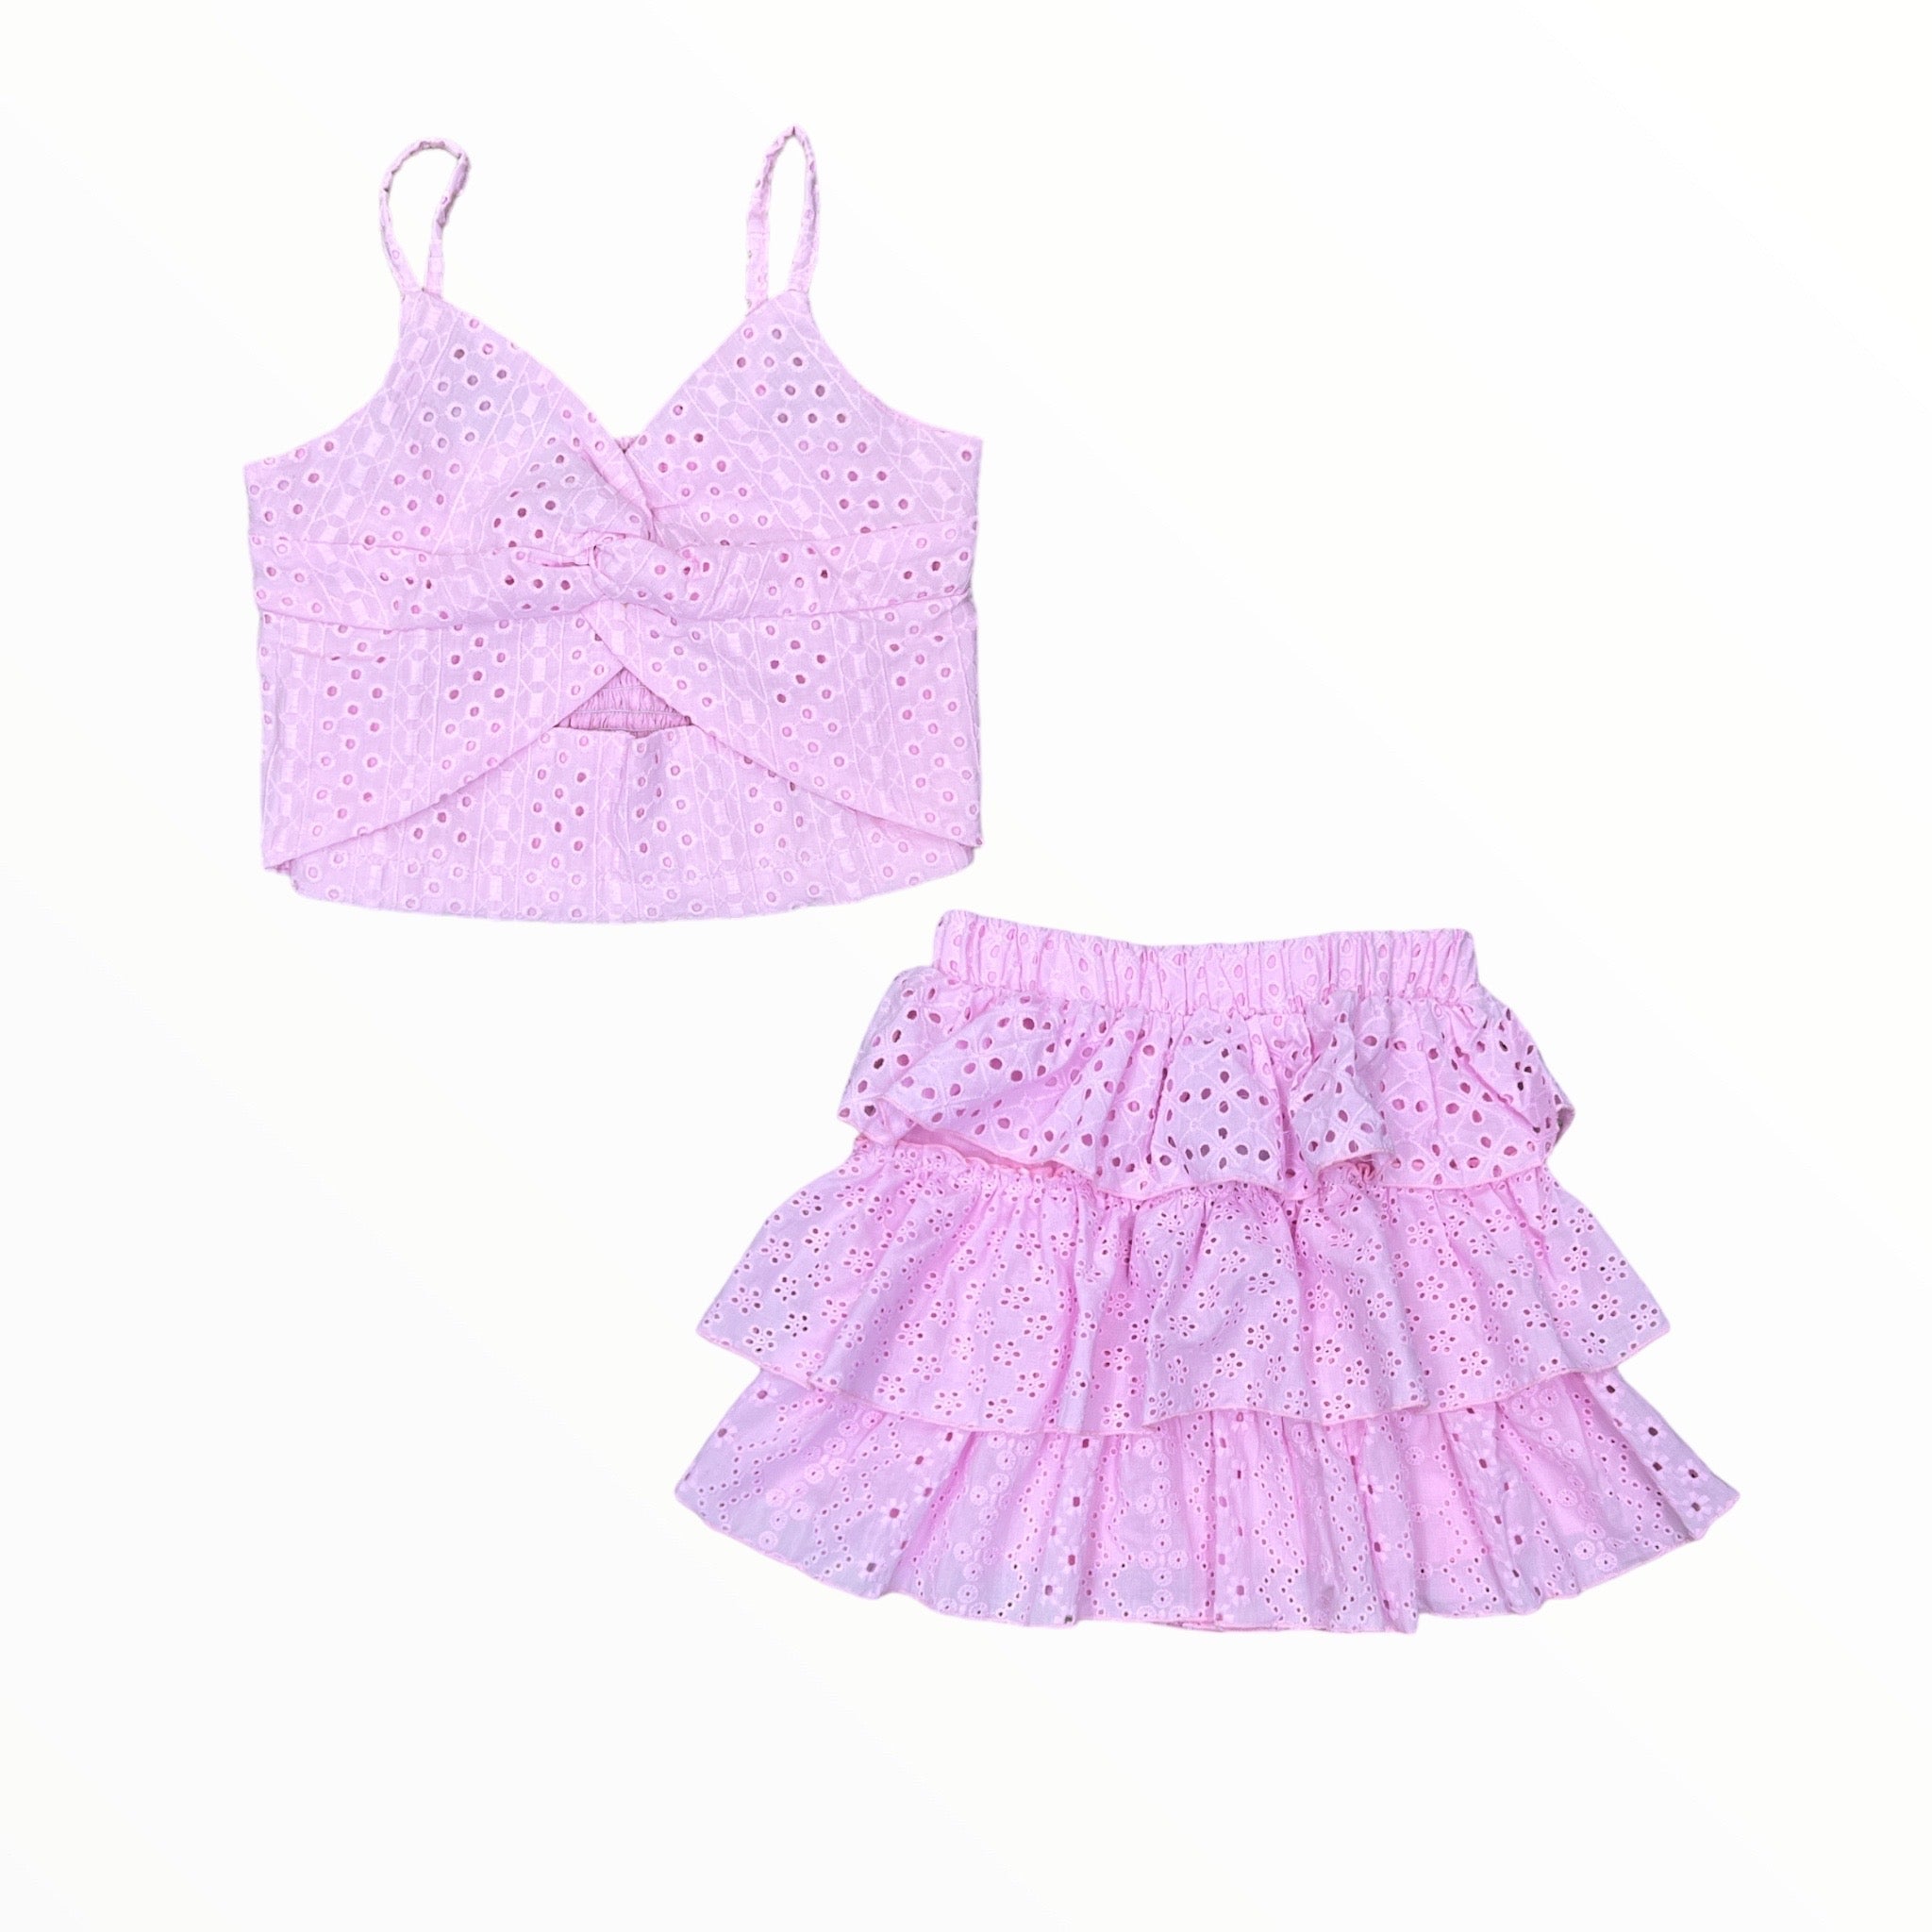 FLOWERS BY ZOE CROCHET TANK AND SKIRT SET - PASTEL PINK